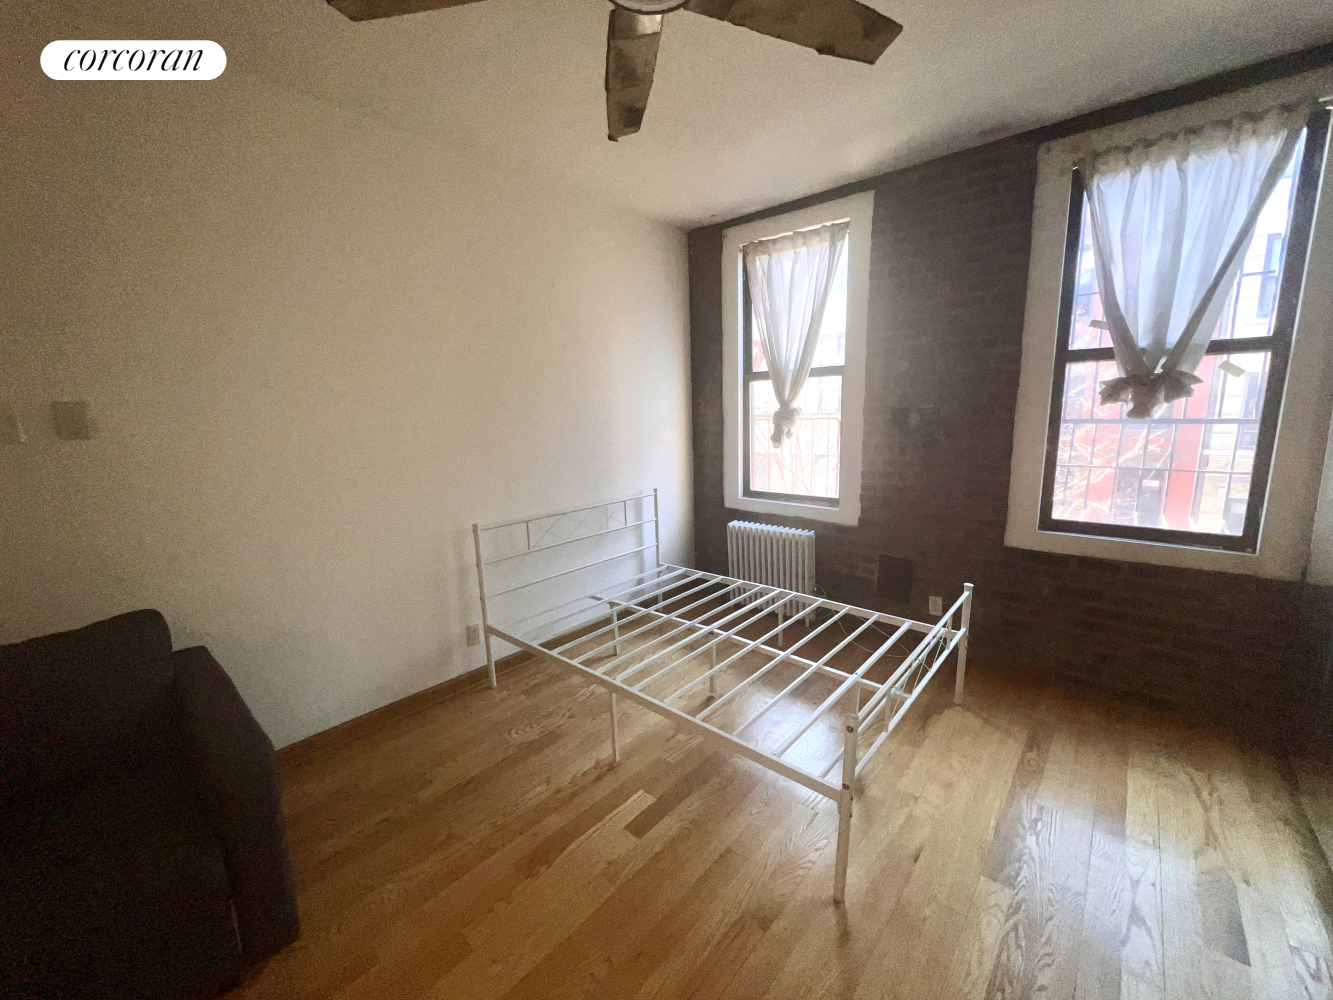 70 Orchard Street 12, Lower East Side, Downtown, NYC - 1 Bathrooms  
2 Rooms - 